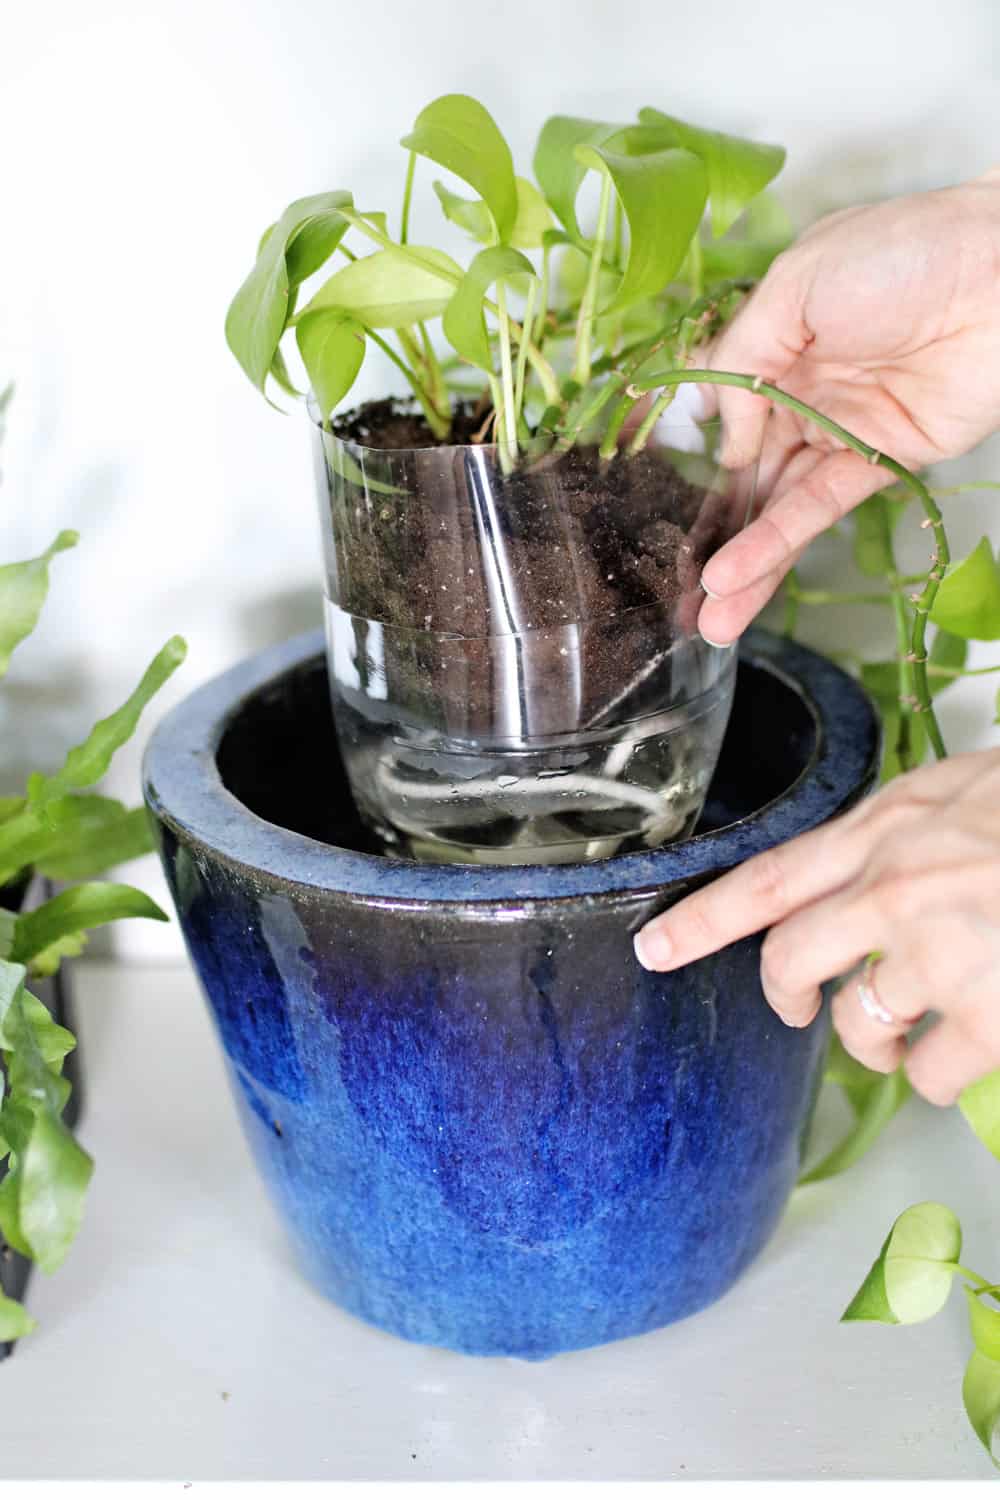 Soda Bottle Planter - 5 Self-Watering Planter Hacks You Have to Try